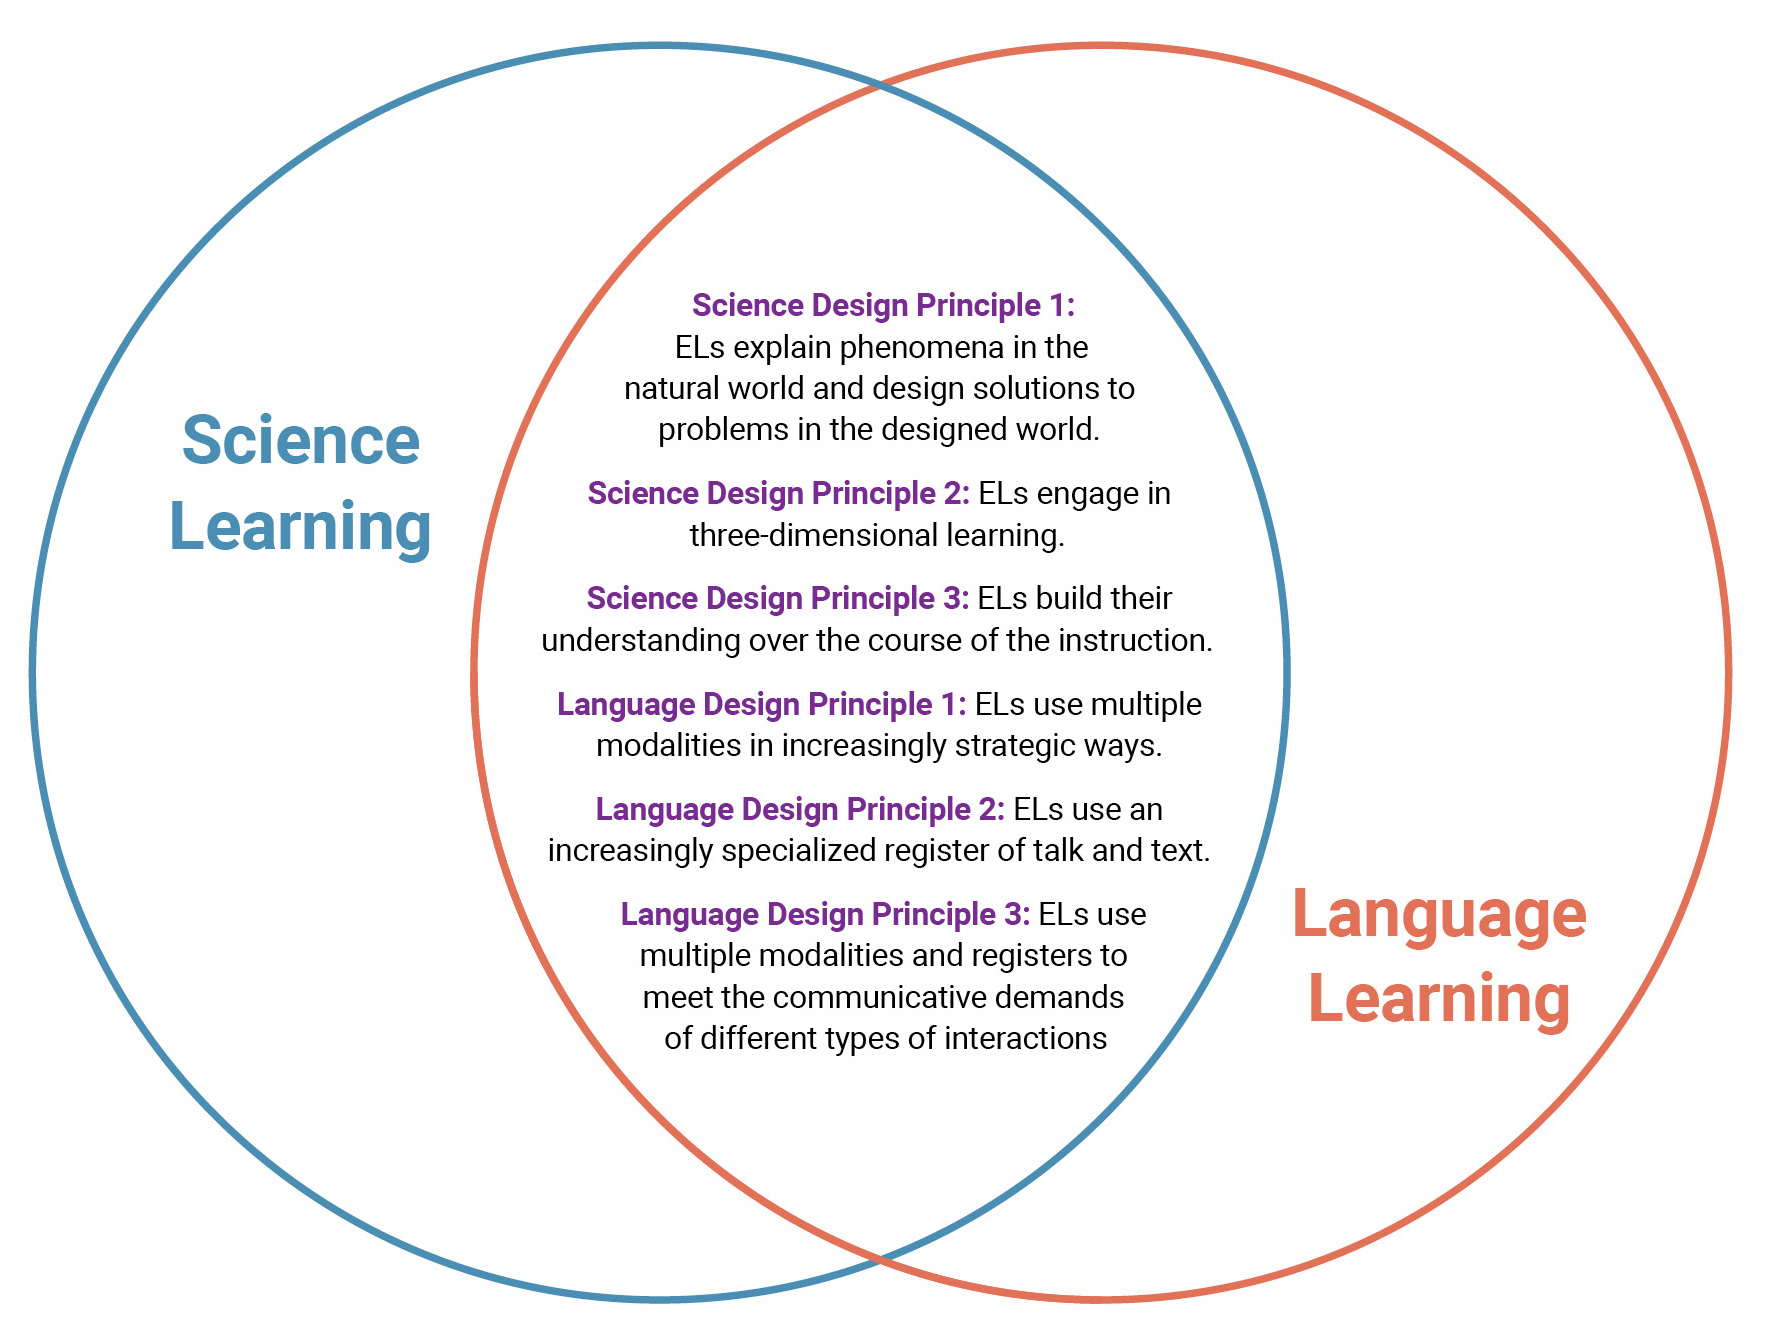 Figure 1 The three science design principles and three language design principles.